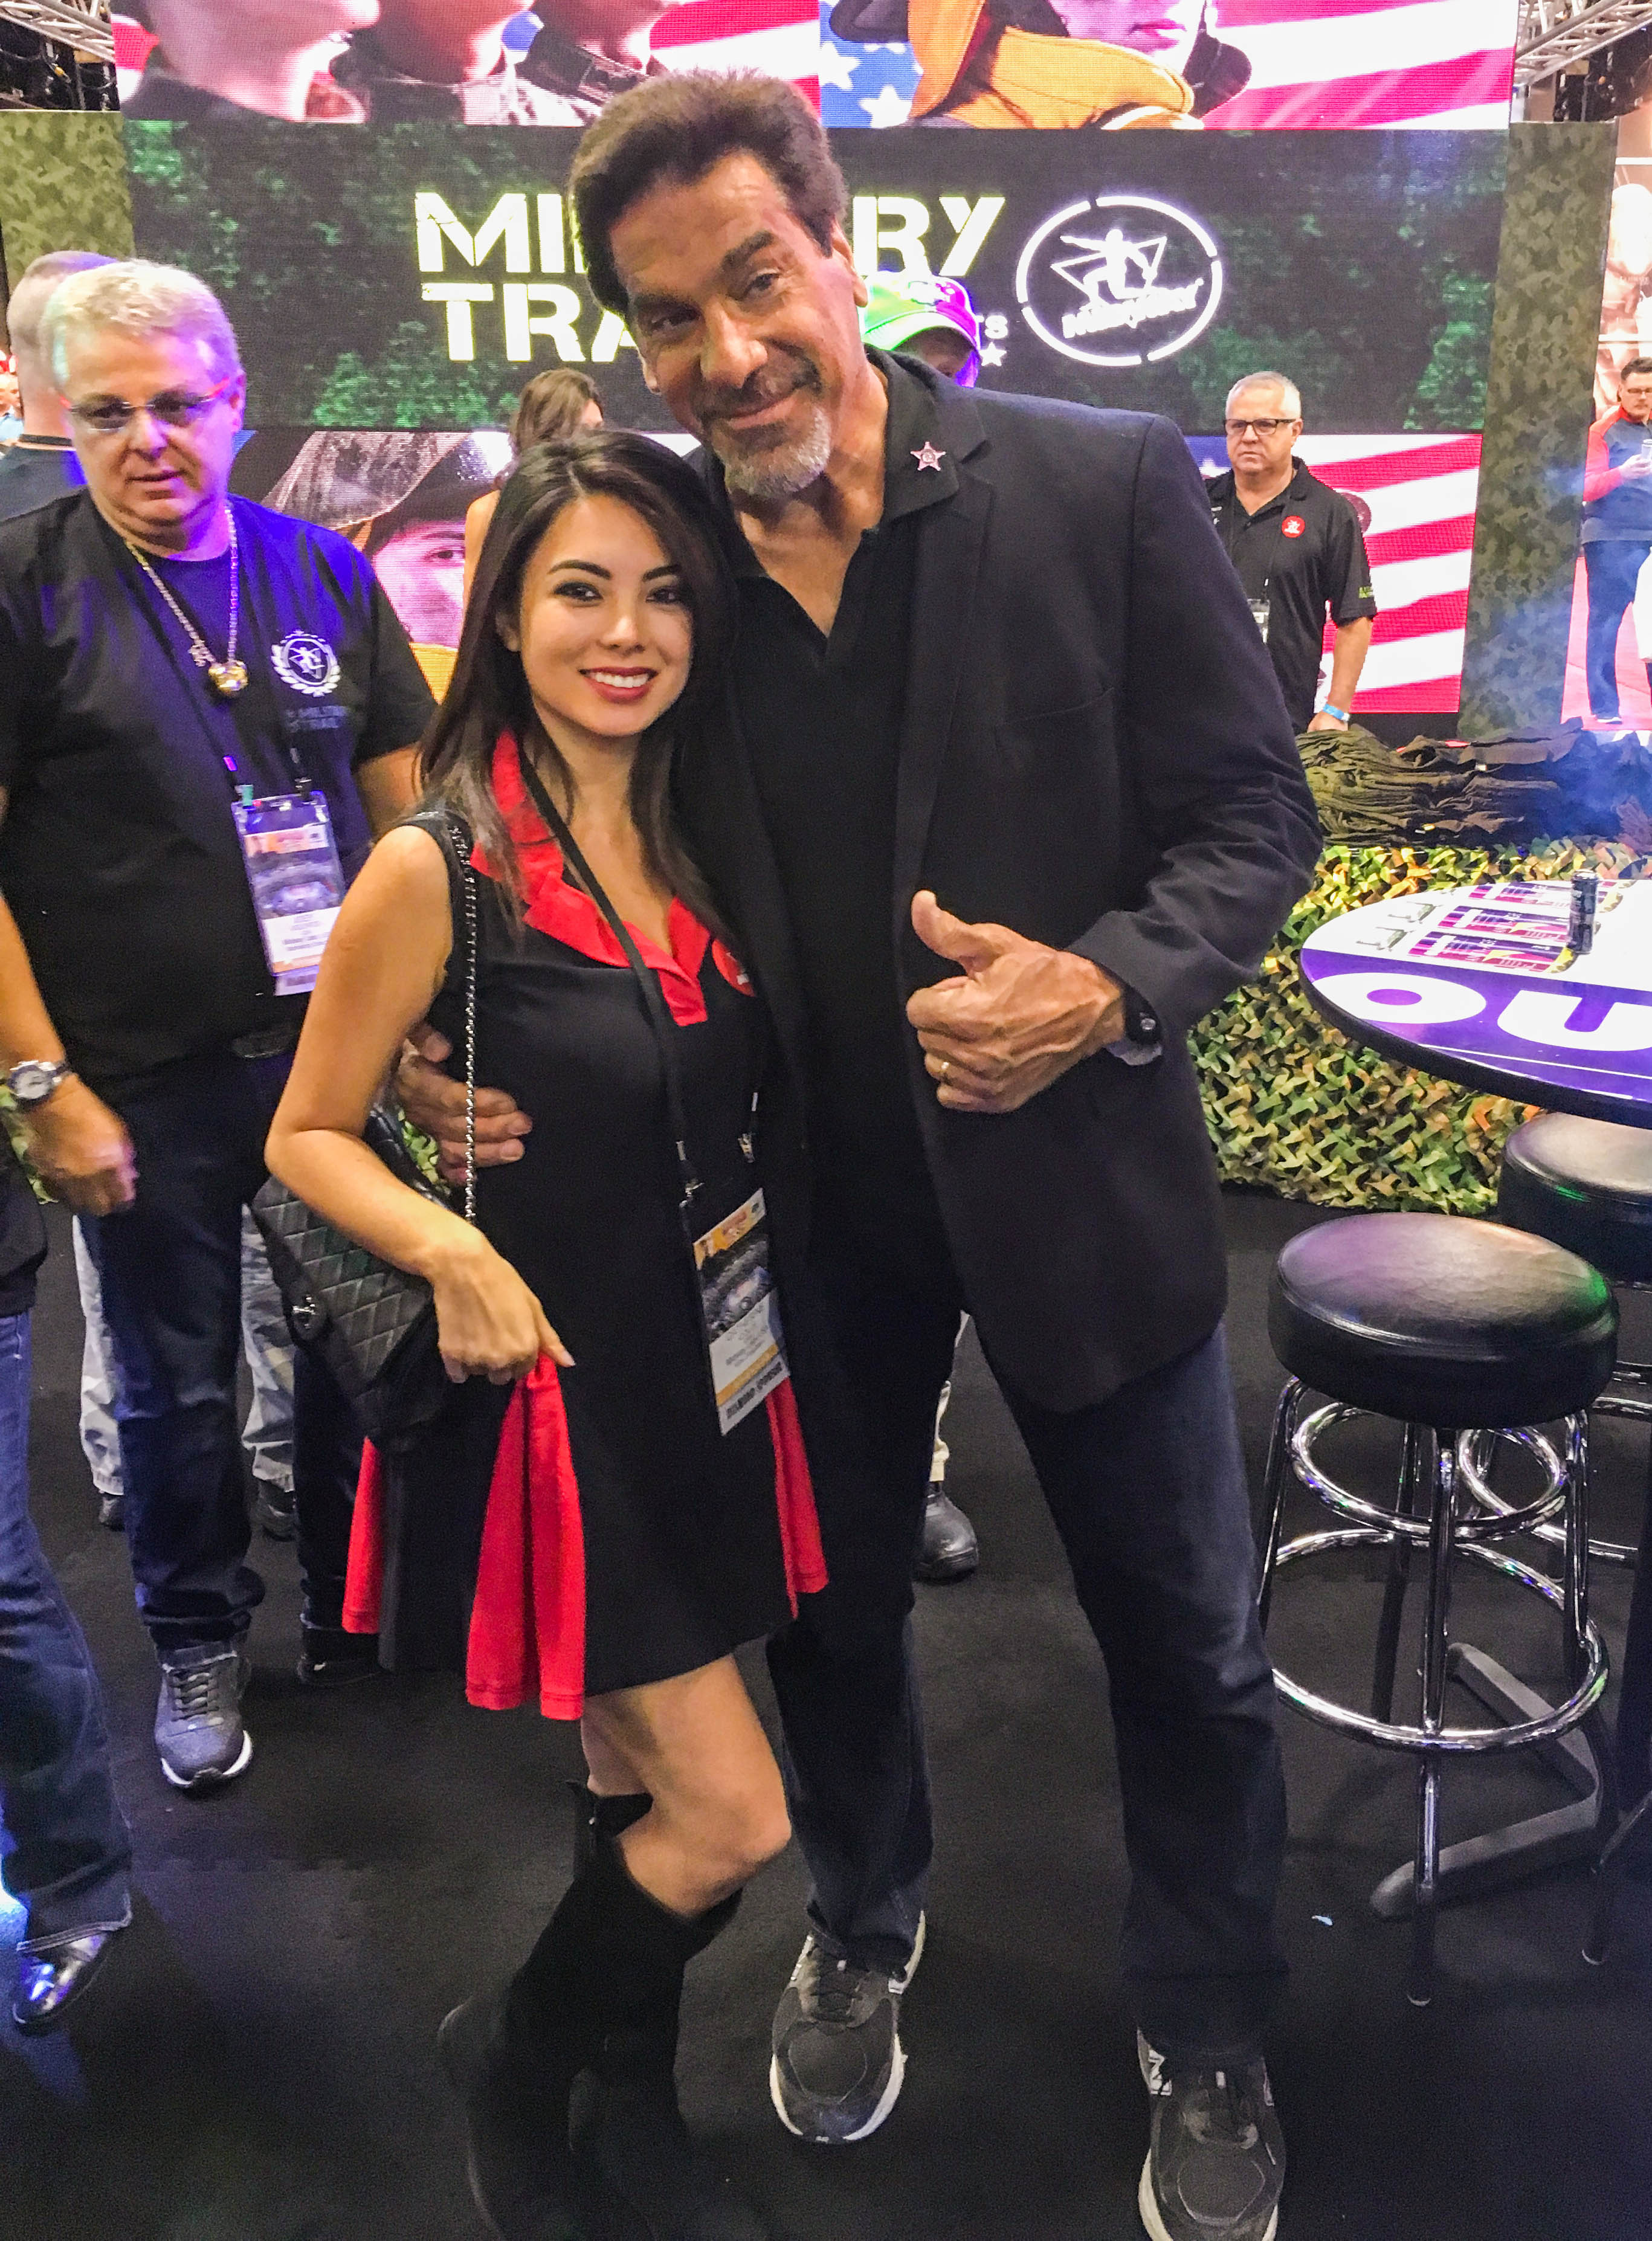 Midway Labs VP Catherine Colle & Lou Ferrigno at the booth.